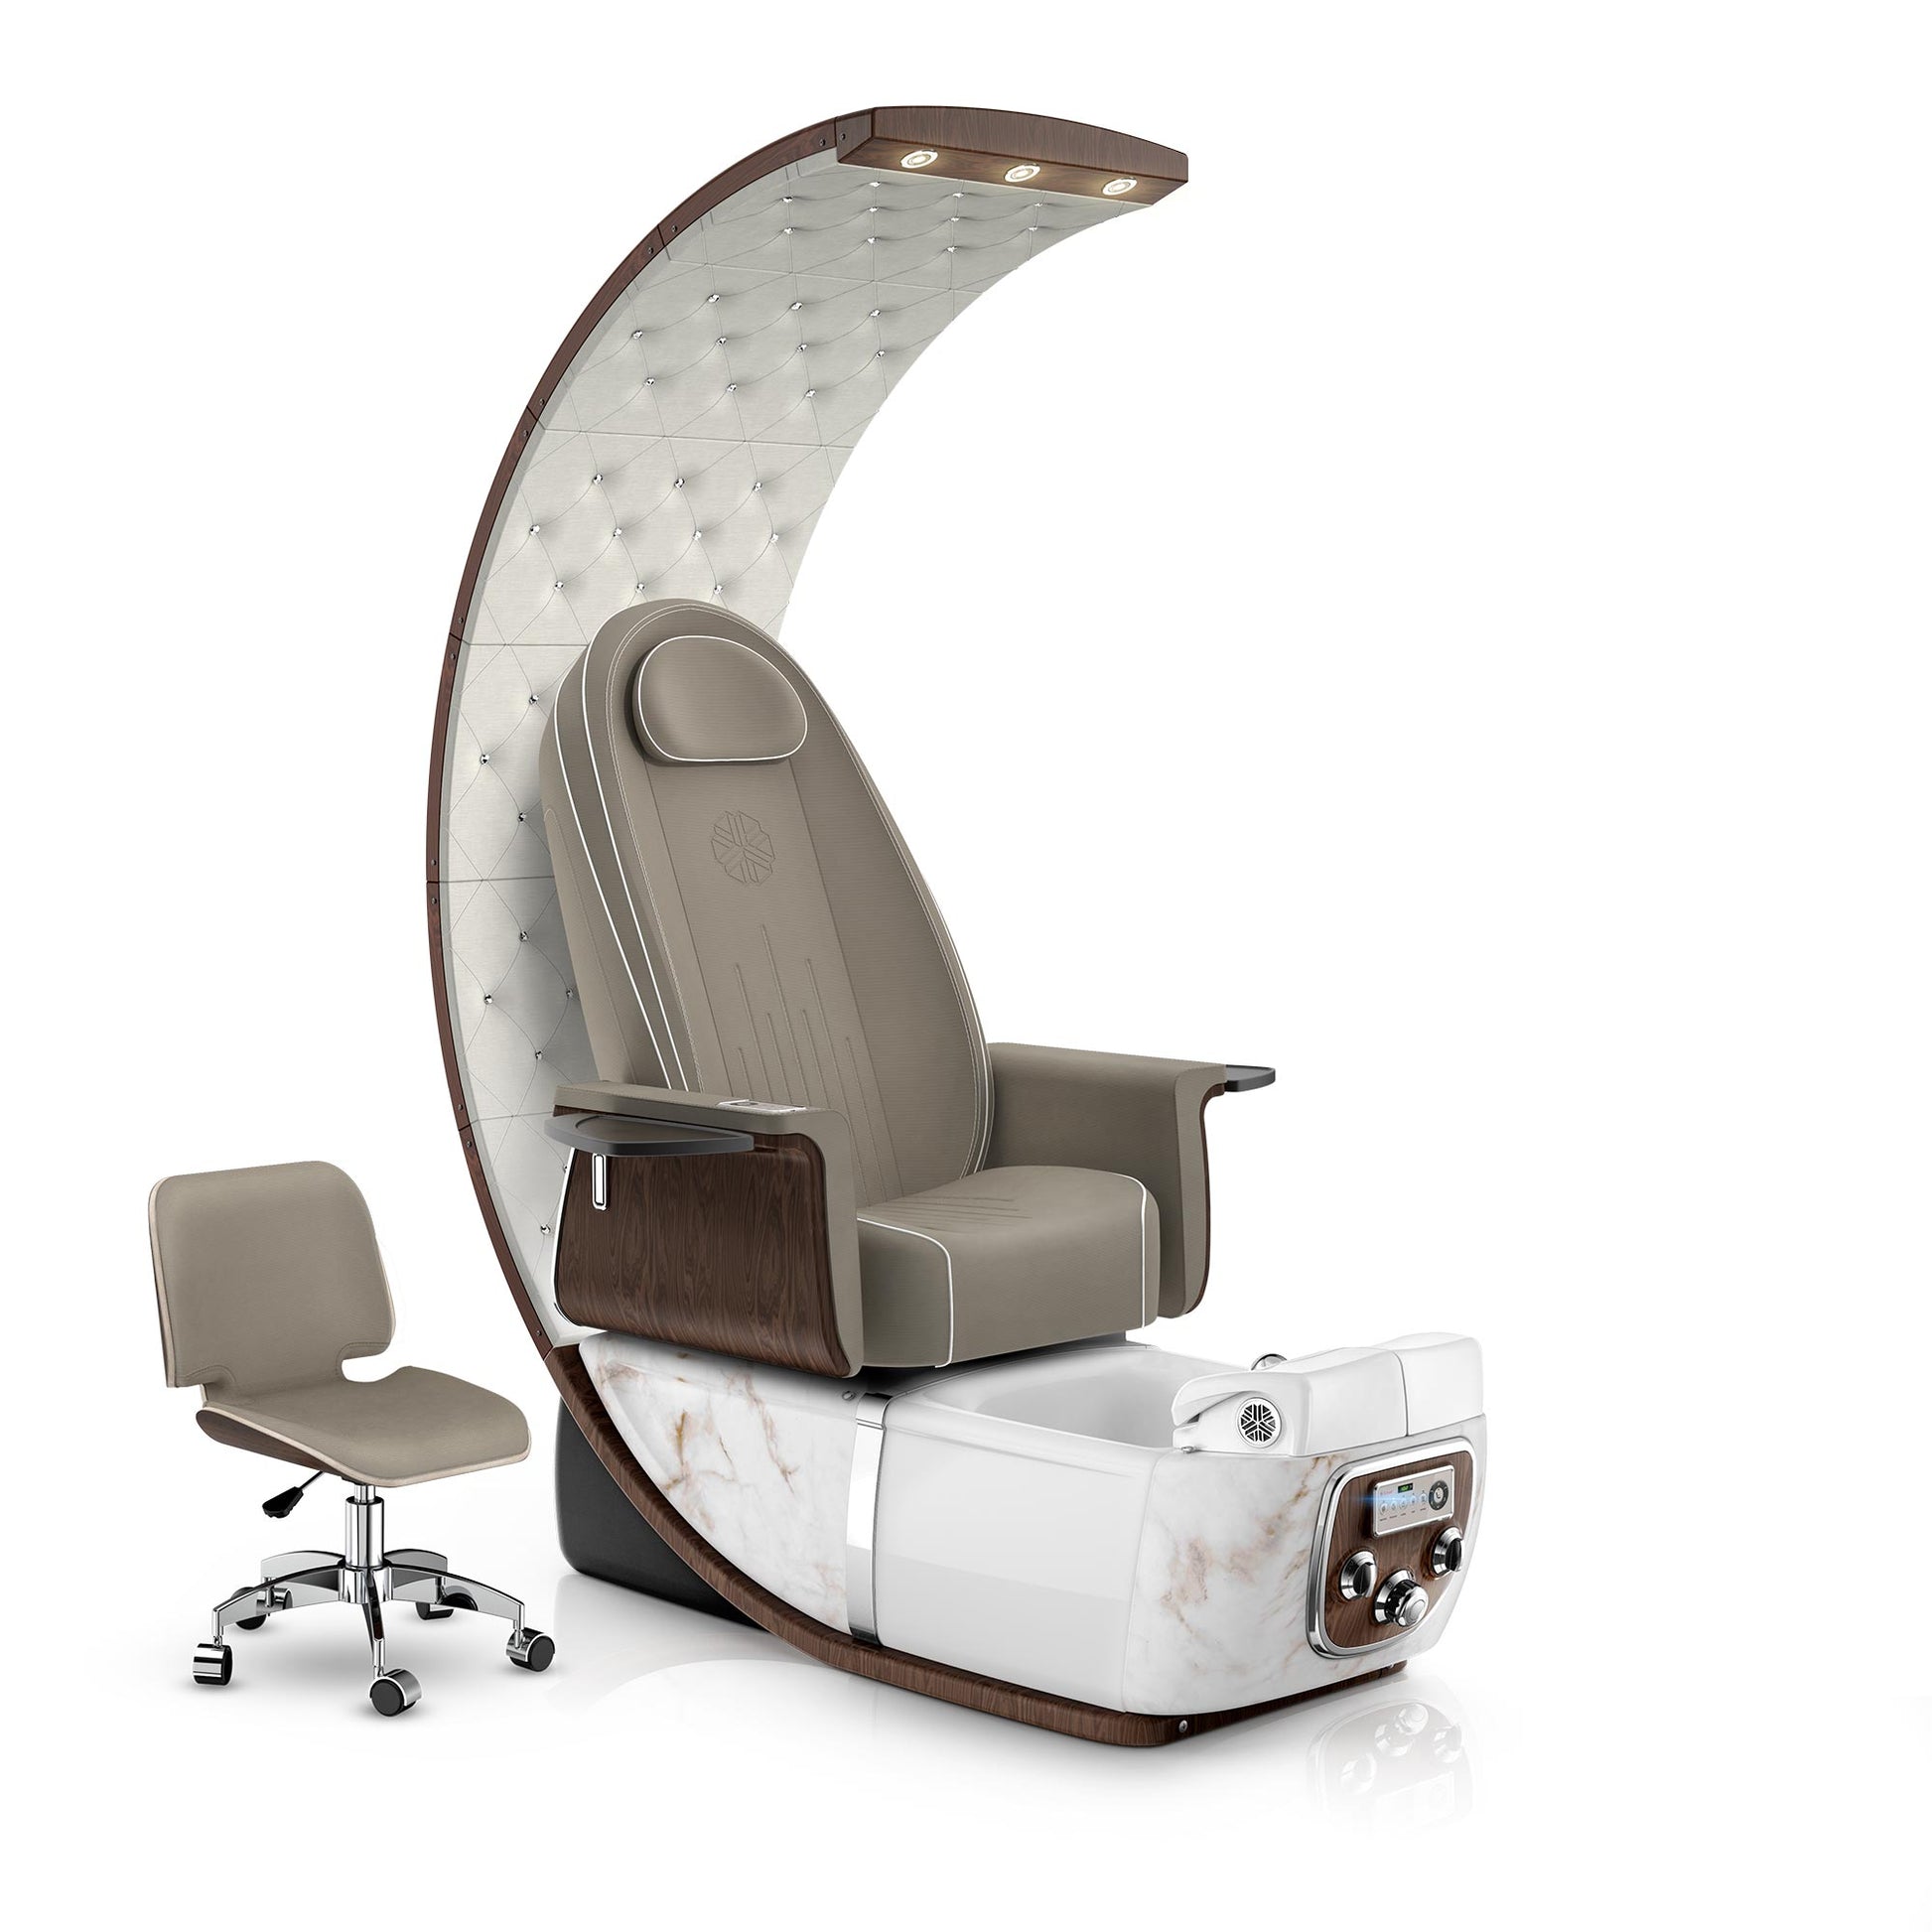 Lexor PRIVÉ Lounge pedicure chair with claystone cushion and white moonstone spa base